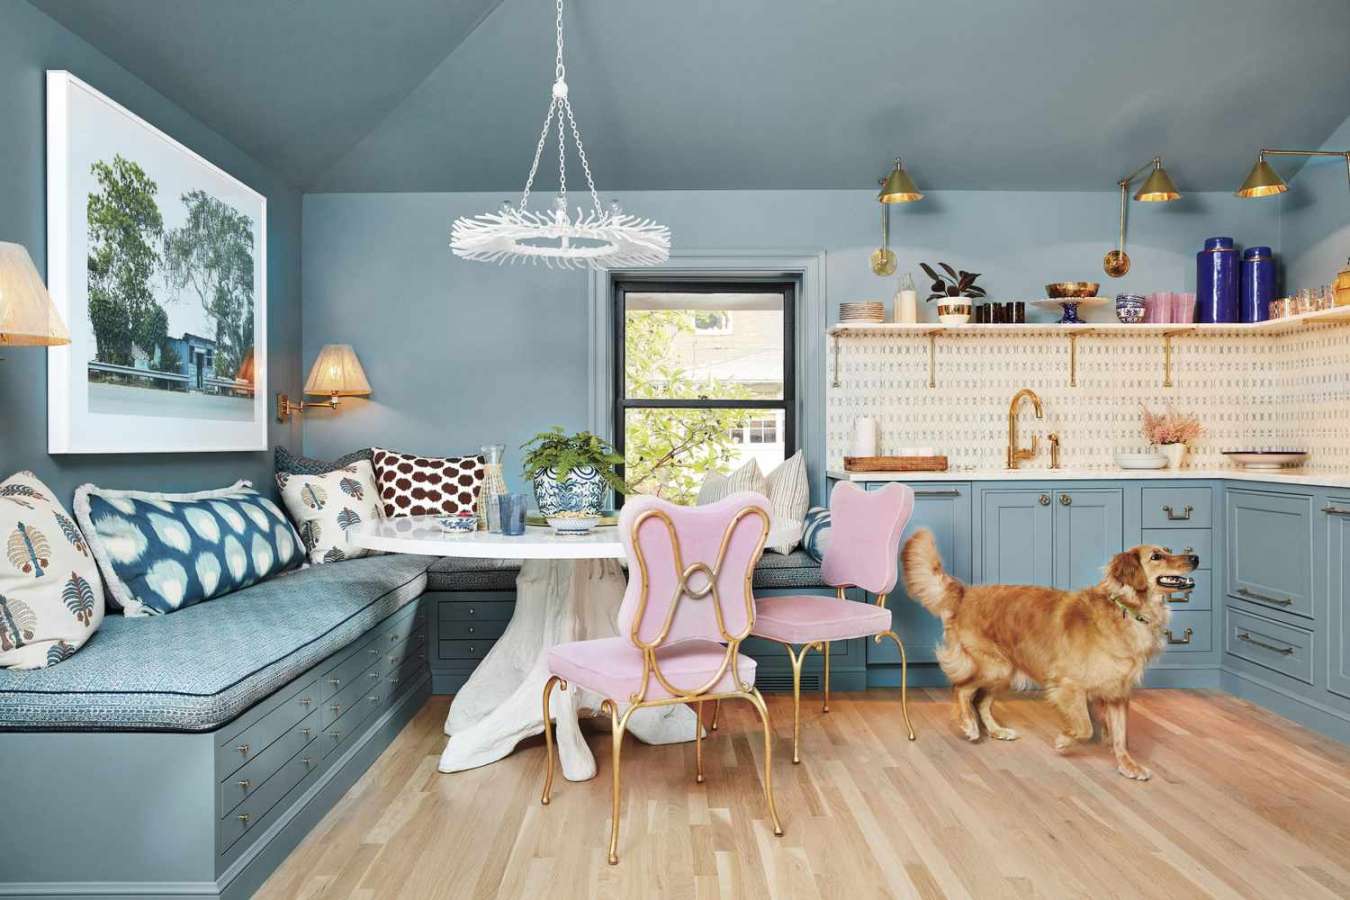 Small Space Decorating Tricks You Should Steal